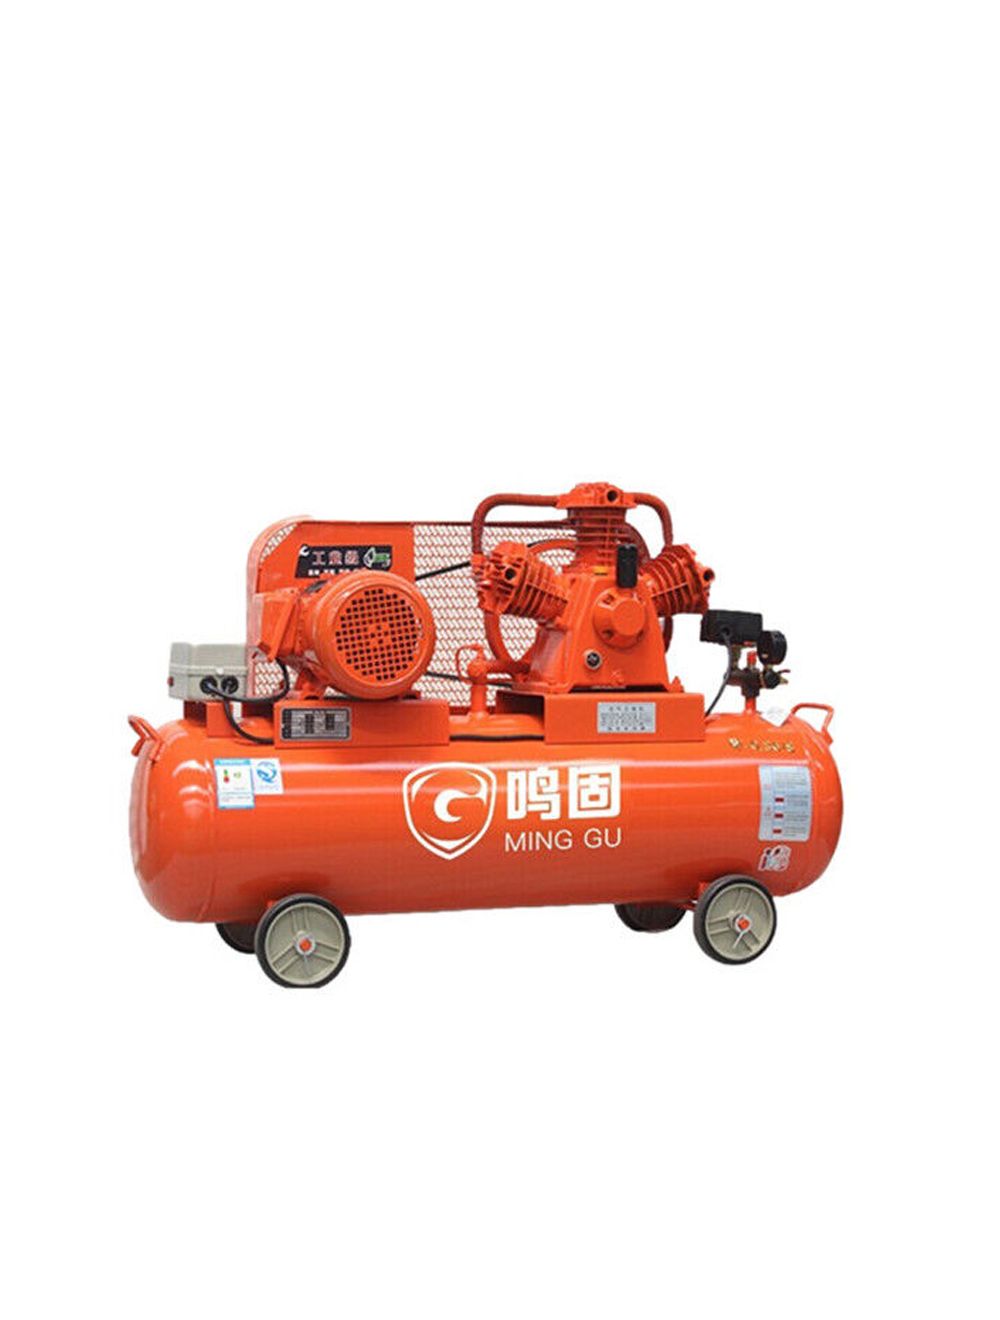 New In stock for sale, MING GU Air Compressor W-1.05-12.5